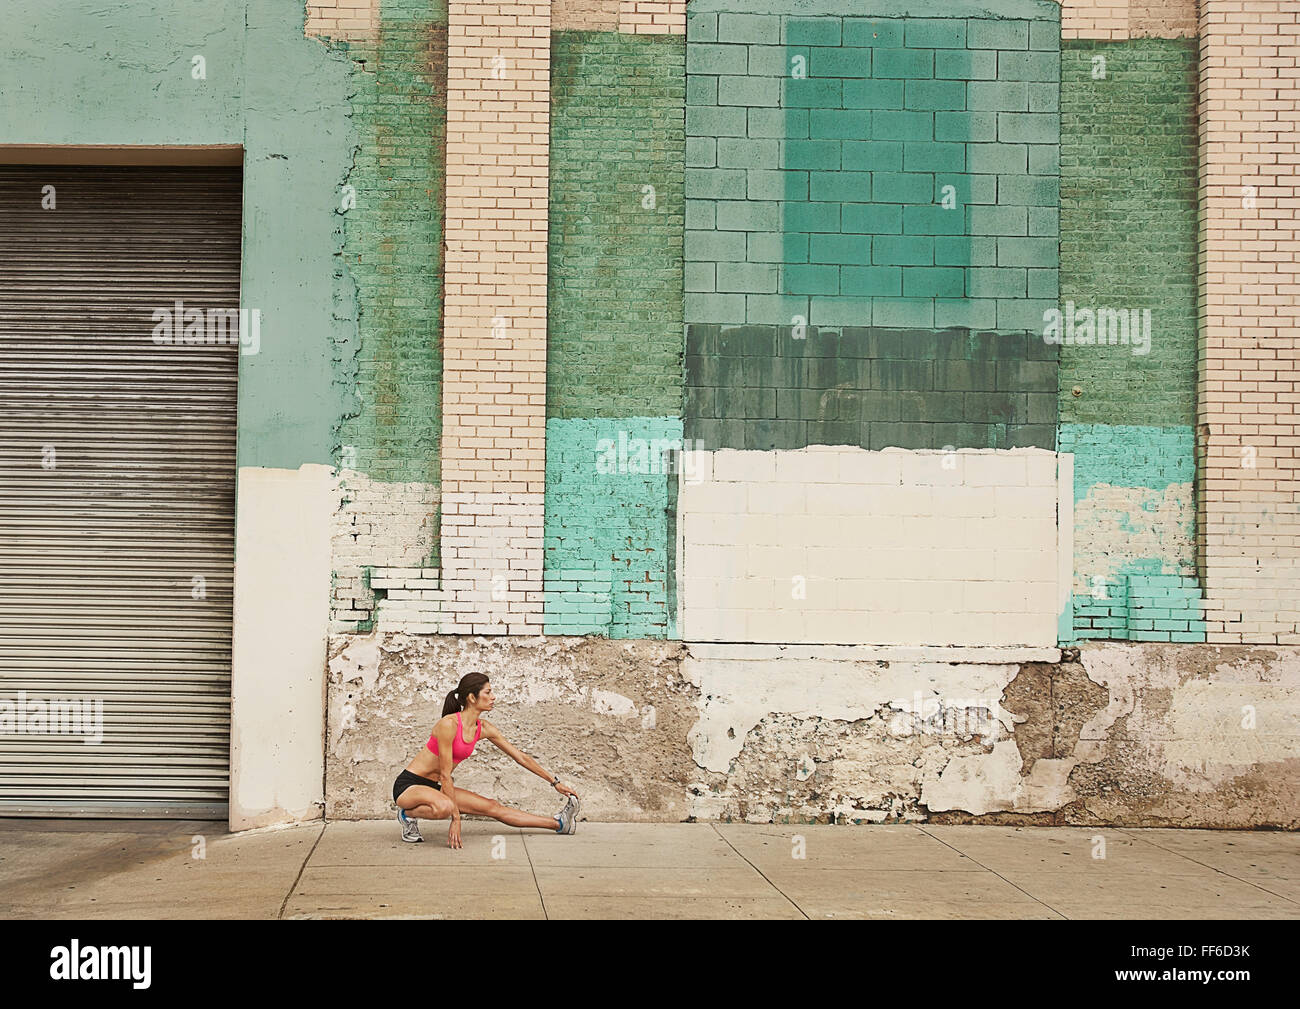 A woman in running gear, crop top and shorts, stretching her body and preparing for a run, or cooling down after exercise. Stock Photo